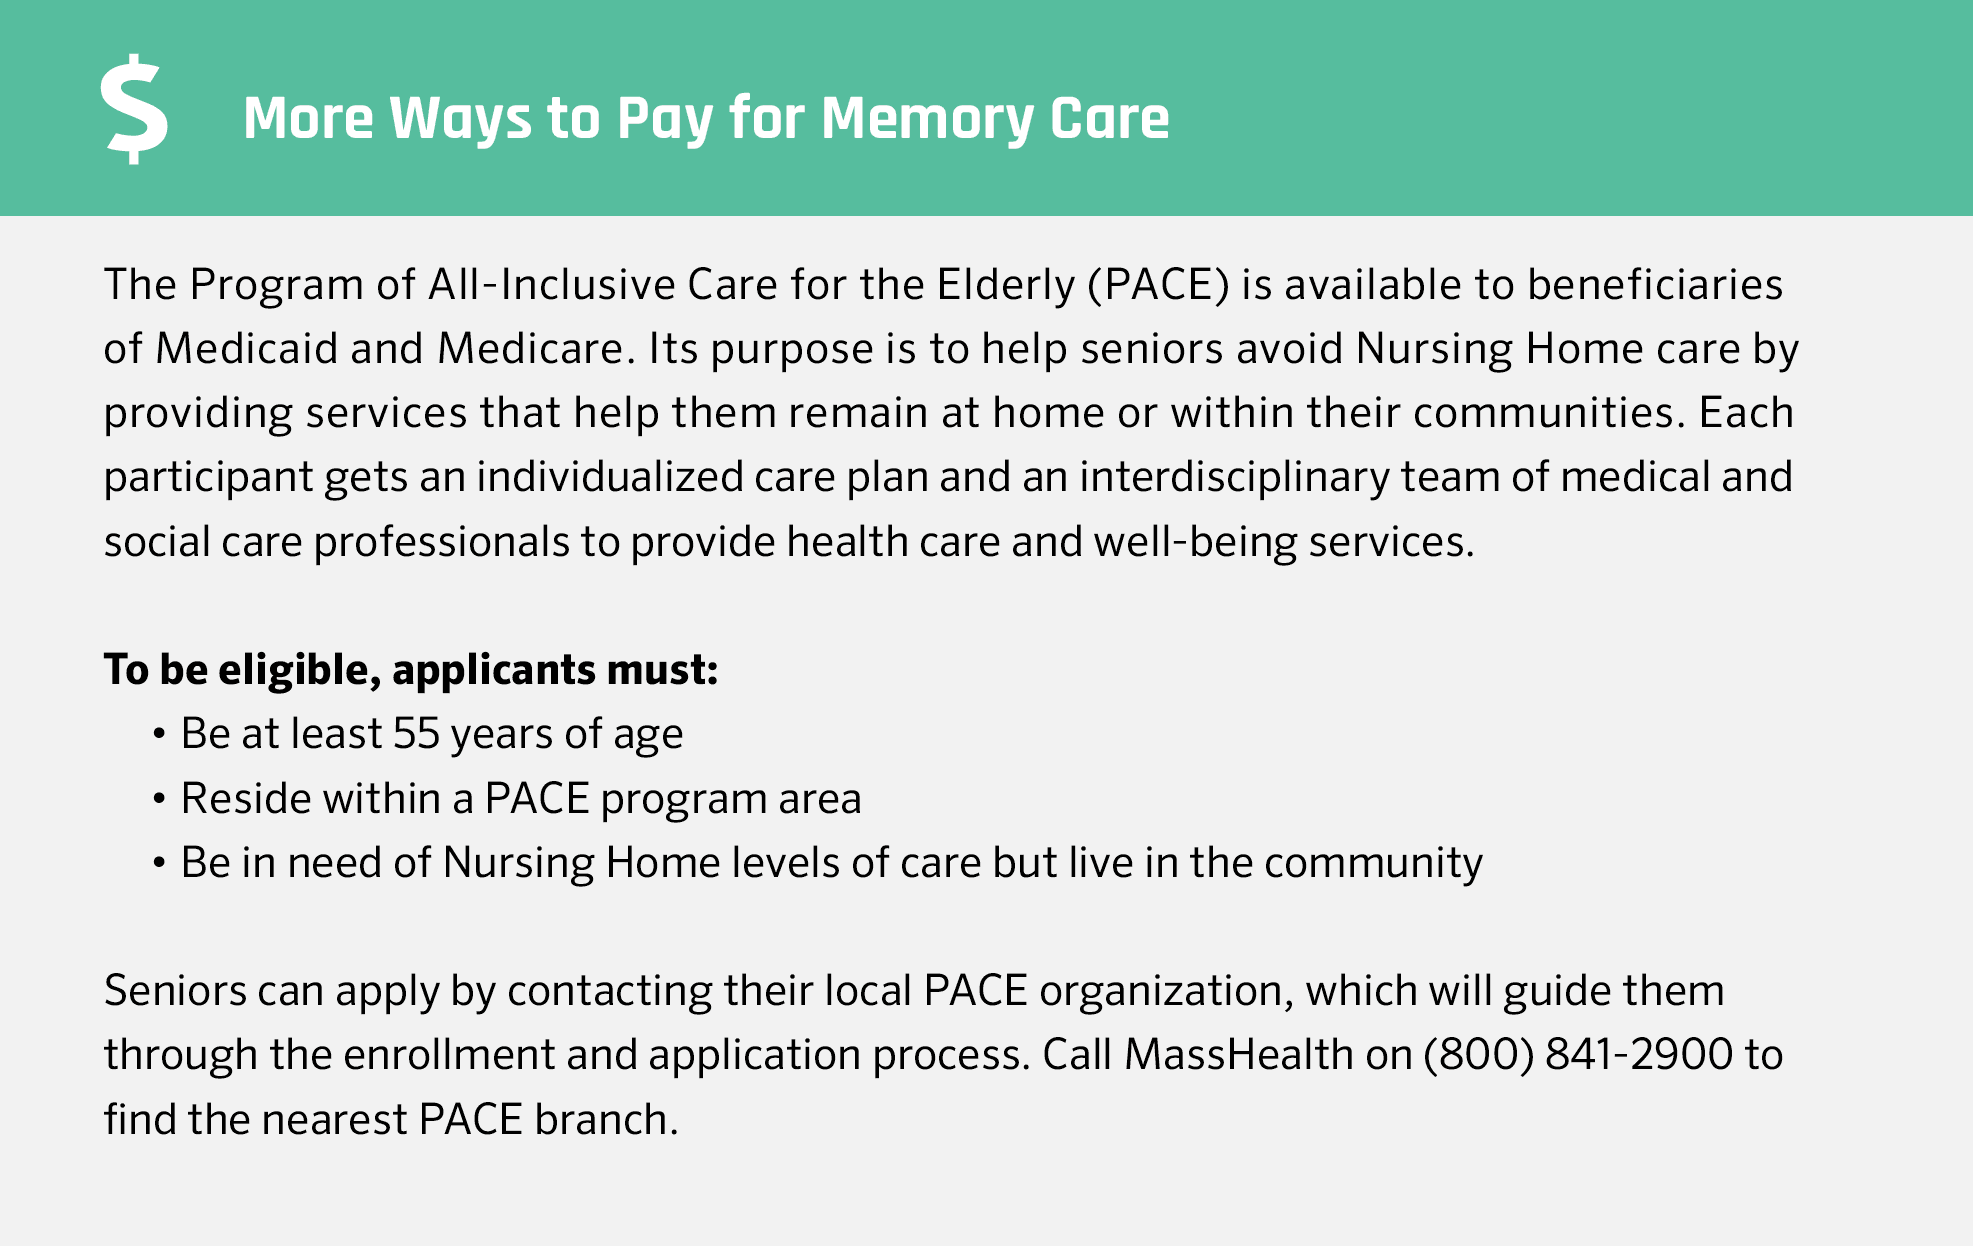 Financial Assistance for Memory Care in Massachusetts 